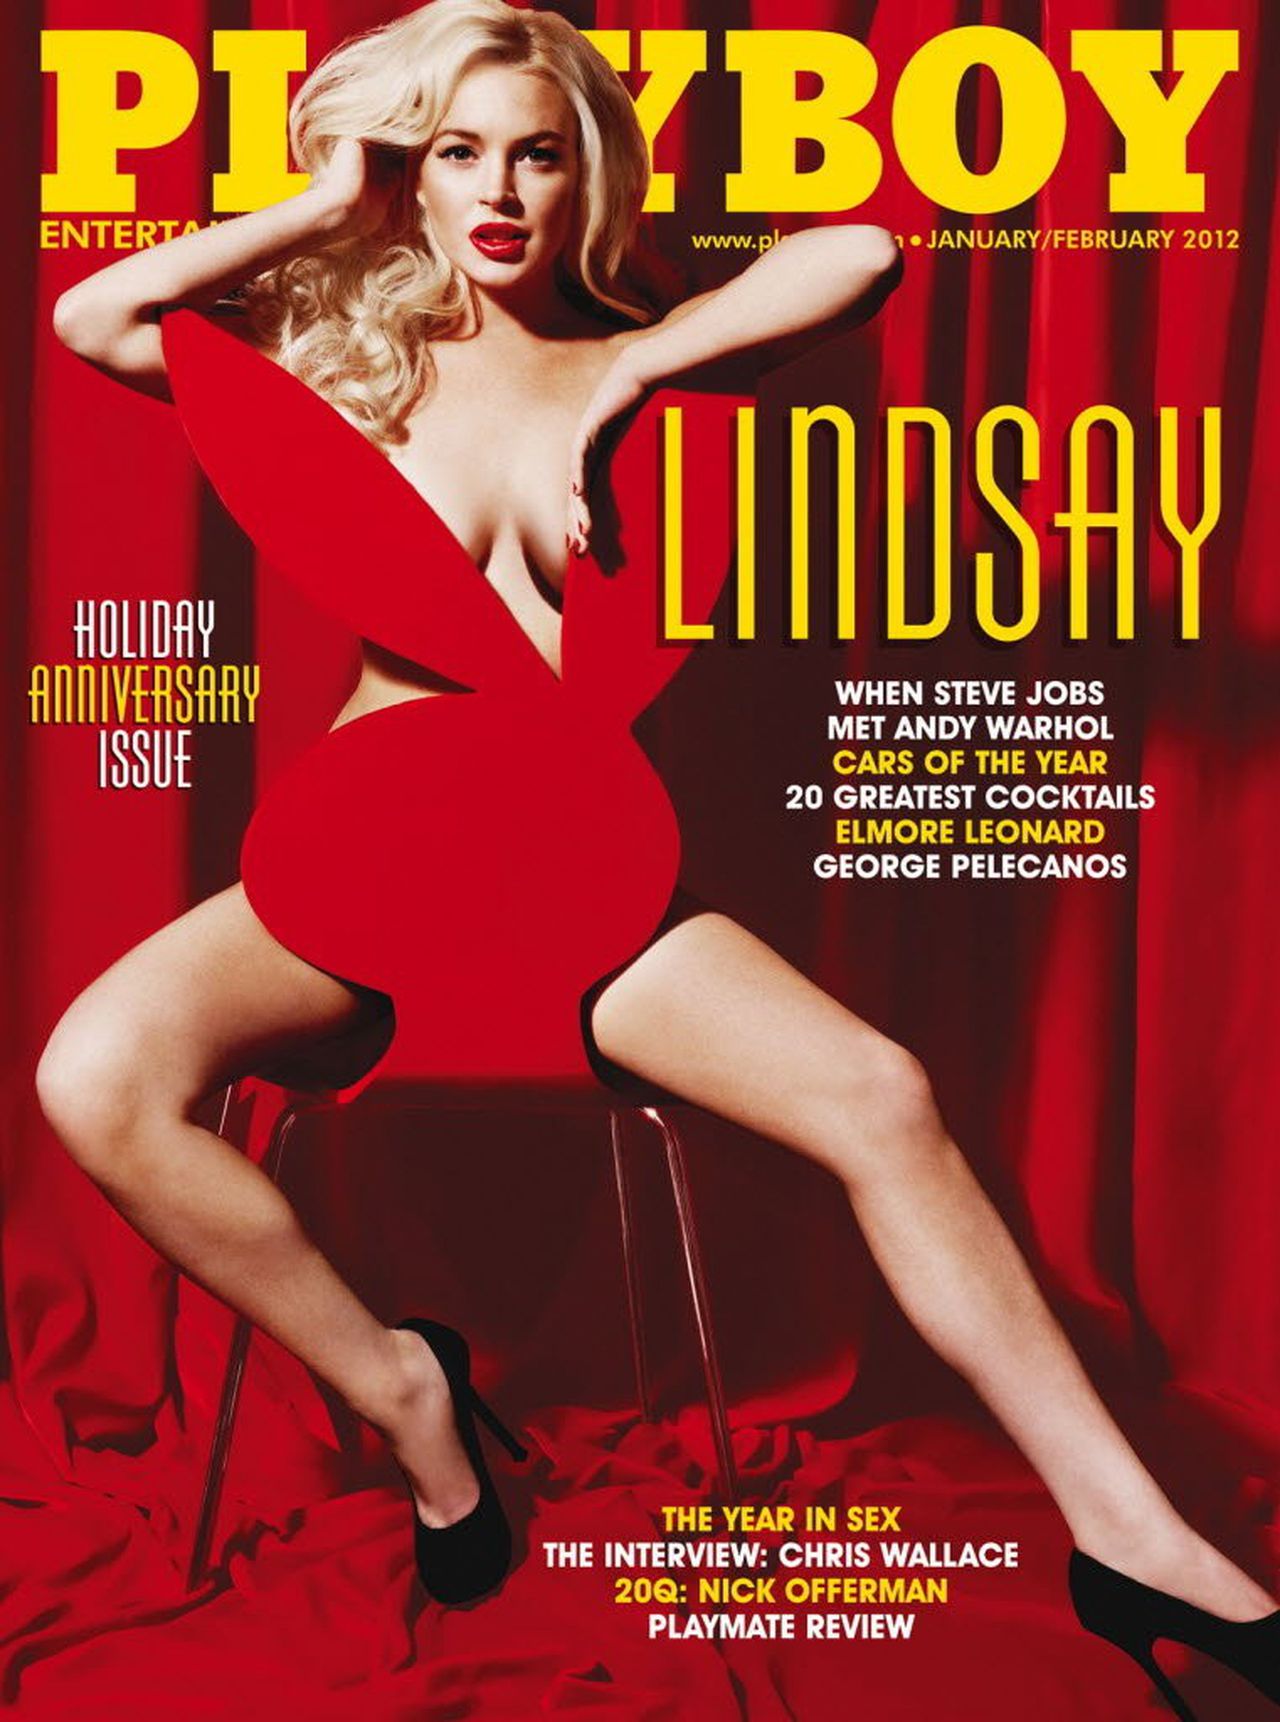 Best of Lindsay lohan playboy pictures